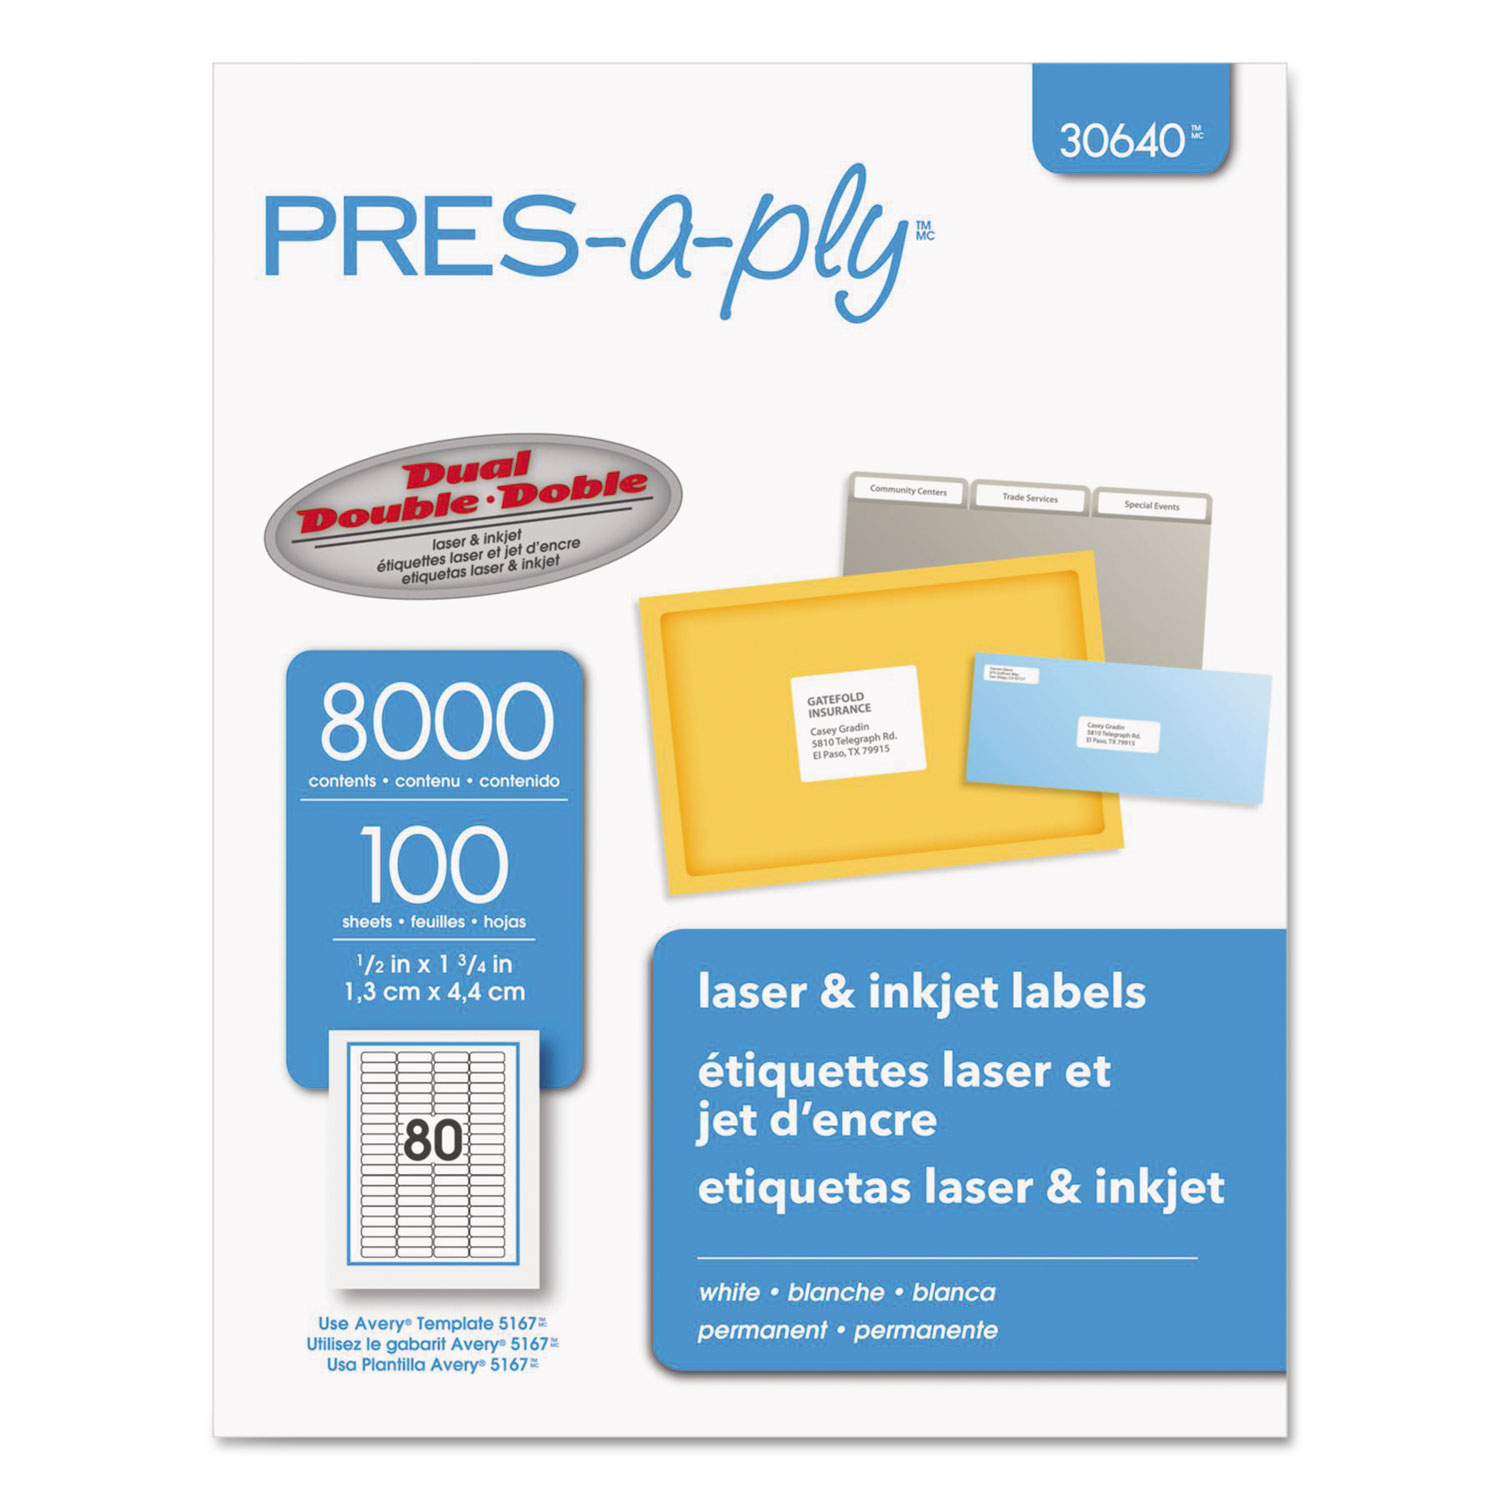  PRES-a-ply 30640 Labels, Inkjet/Laser Printers, 0.5 x 1.75, White, 80/Sheet, 100 Sheets/Pack (AVE30640) 